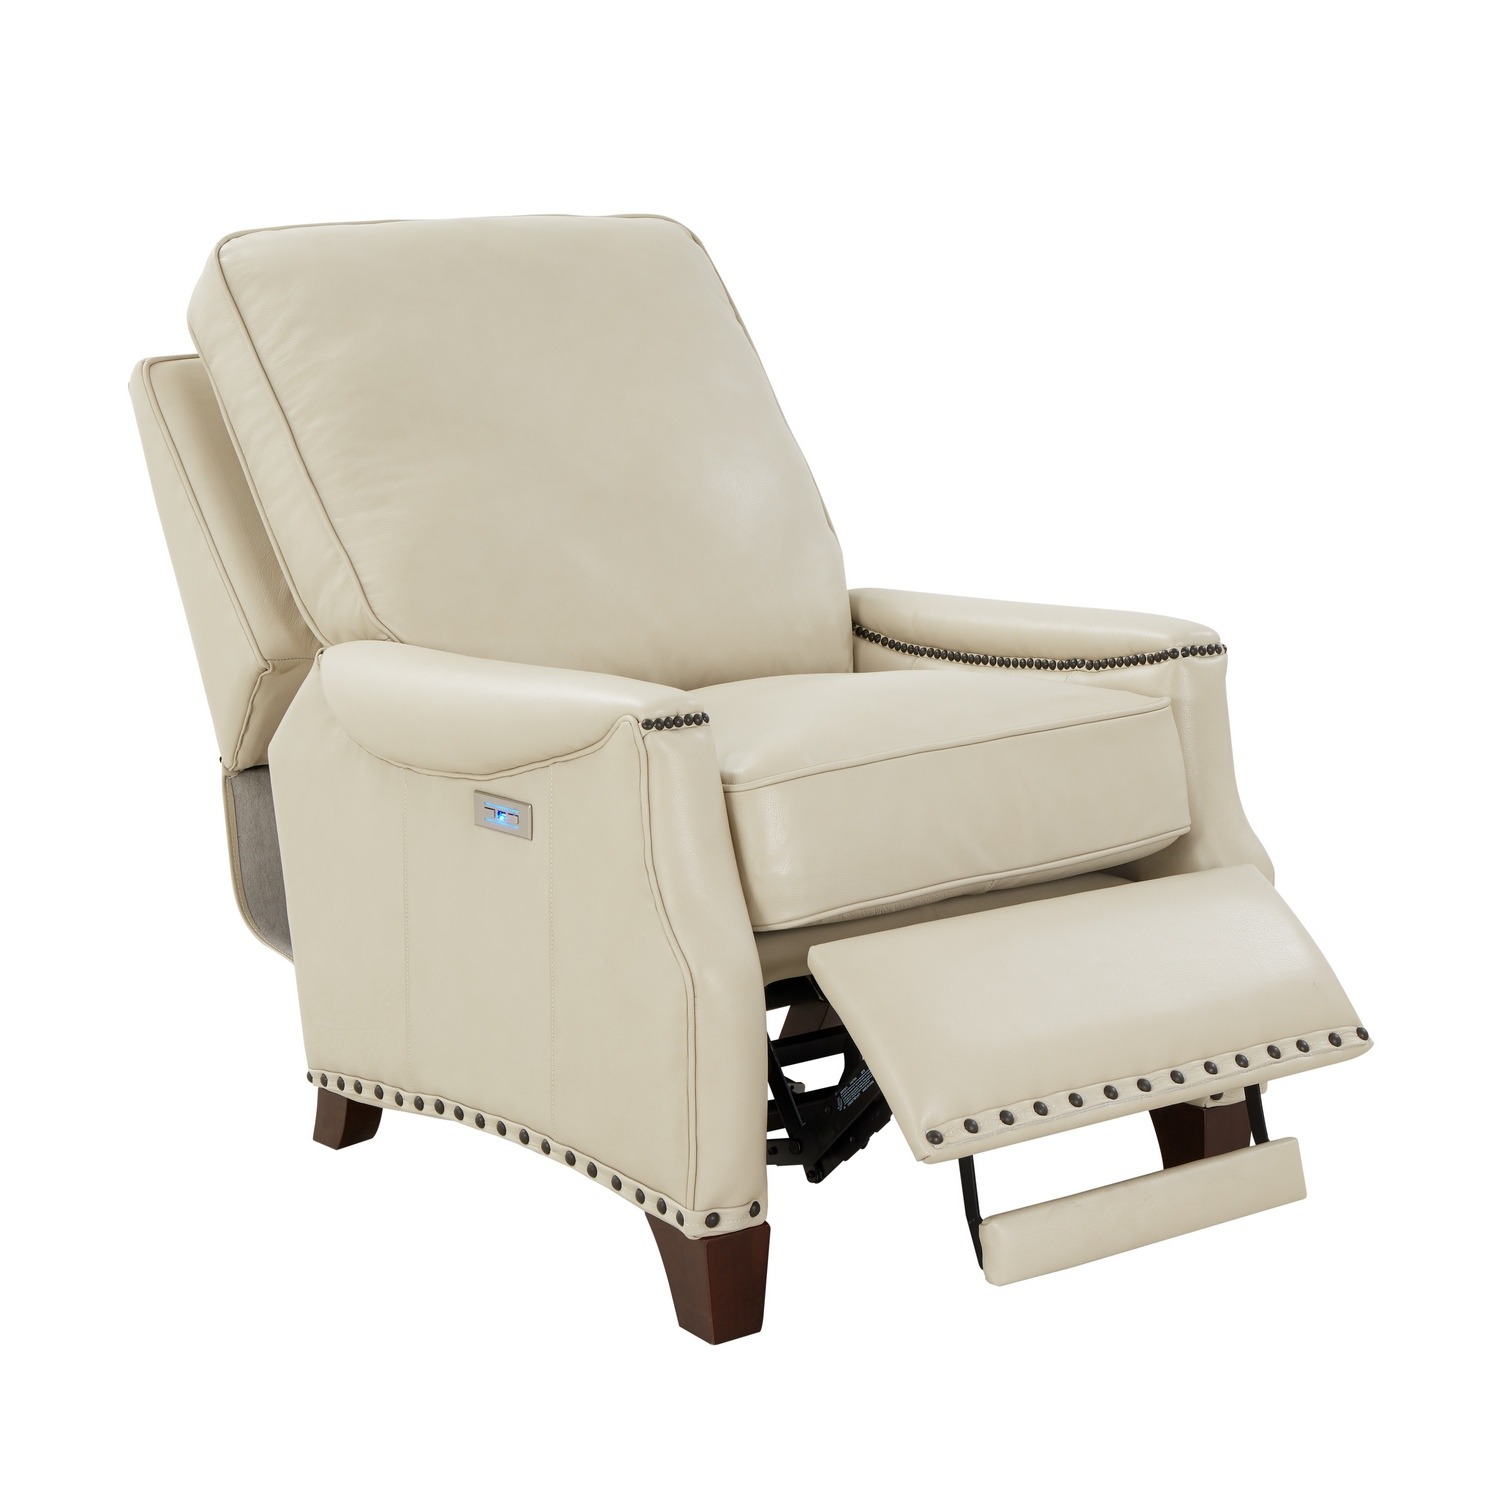 Barcalounger Ellis Power Recliner Chair - Barone Parchment/All Leather